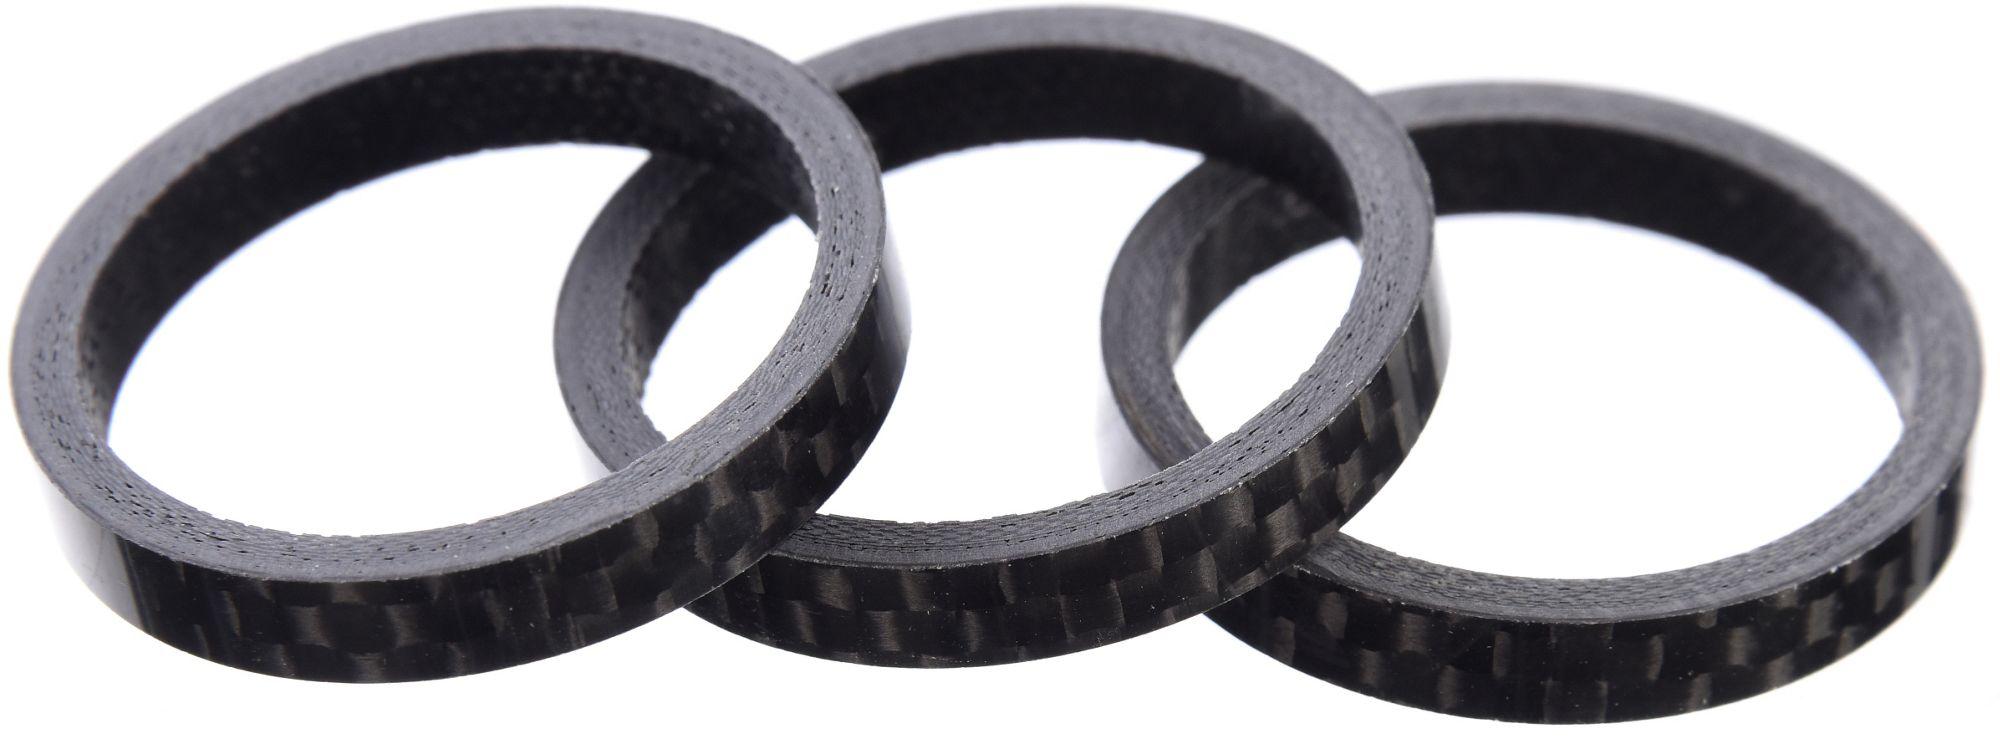 Brand-x Spacer Pack Carbon 3 X 5mm - Black